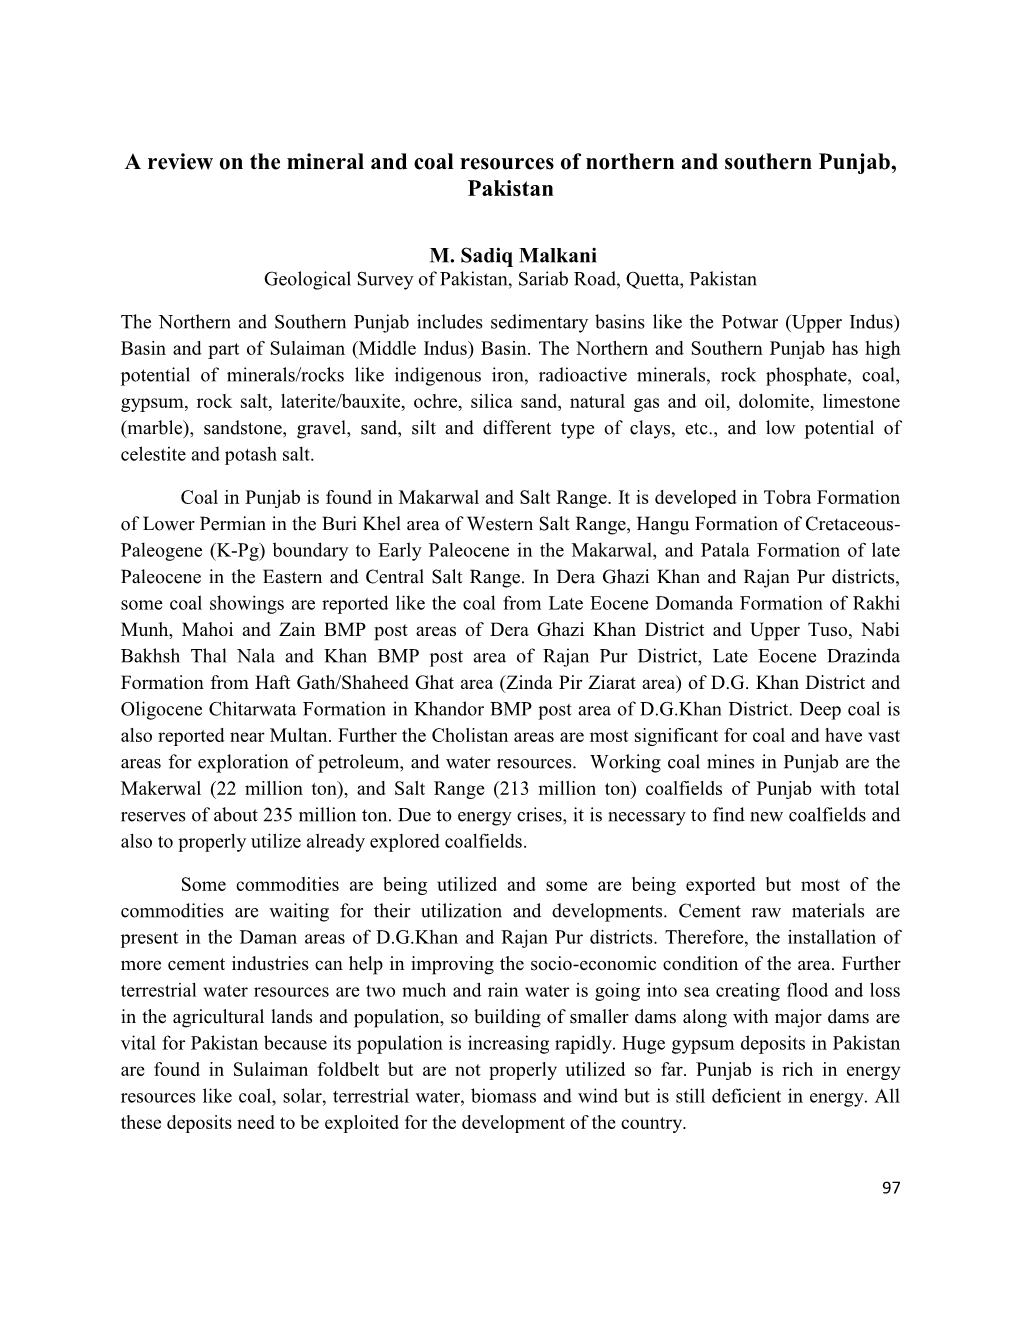 A Review on the Mineral and Coal Resources of Northern and Southern Punjab, Pakistan